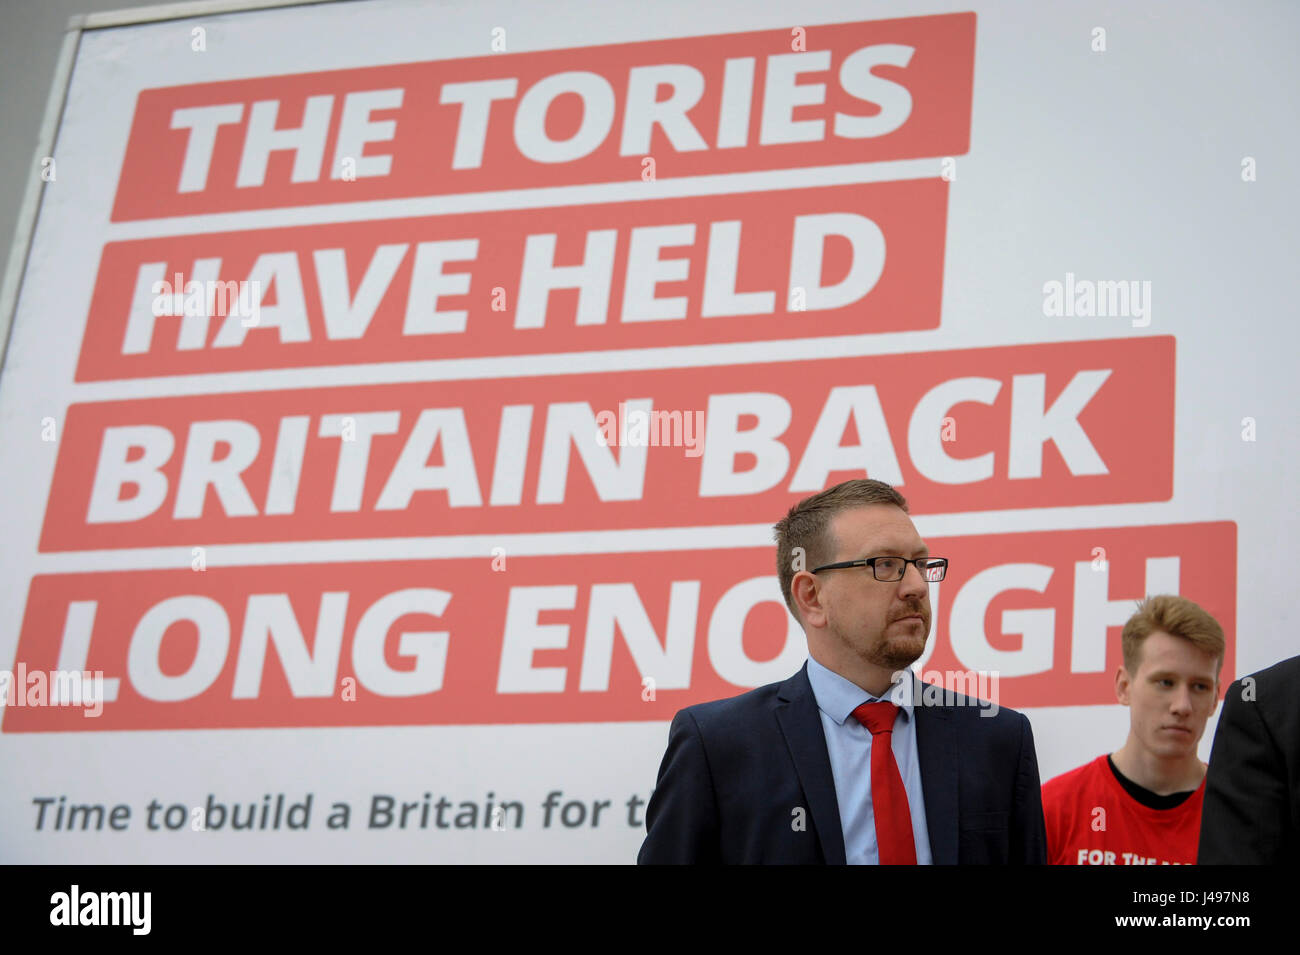 London, UK.  11 May 2017. Andrew Gwynne MP, National Elections and Campaigns Co-ordinator at the unveiling of a new campaign poster for Labour’s General Election campaign at a press call on the South Bank.  Jeremy Corbyn, Leader of the Labour Party, was scheduled to speak, but was called away on other business.   Credit: Stephen Chung / Alamy Live News Stock Photo